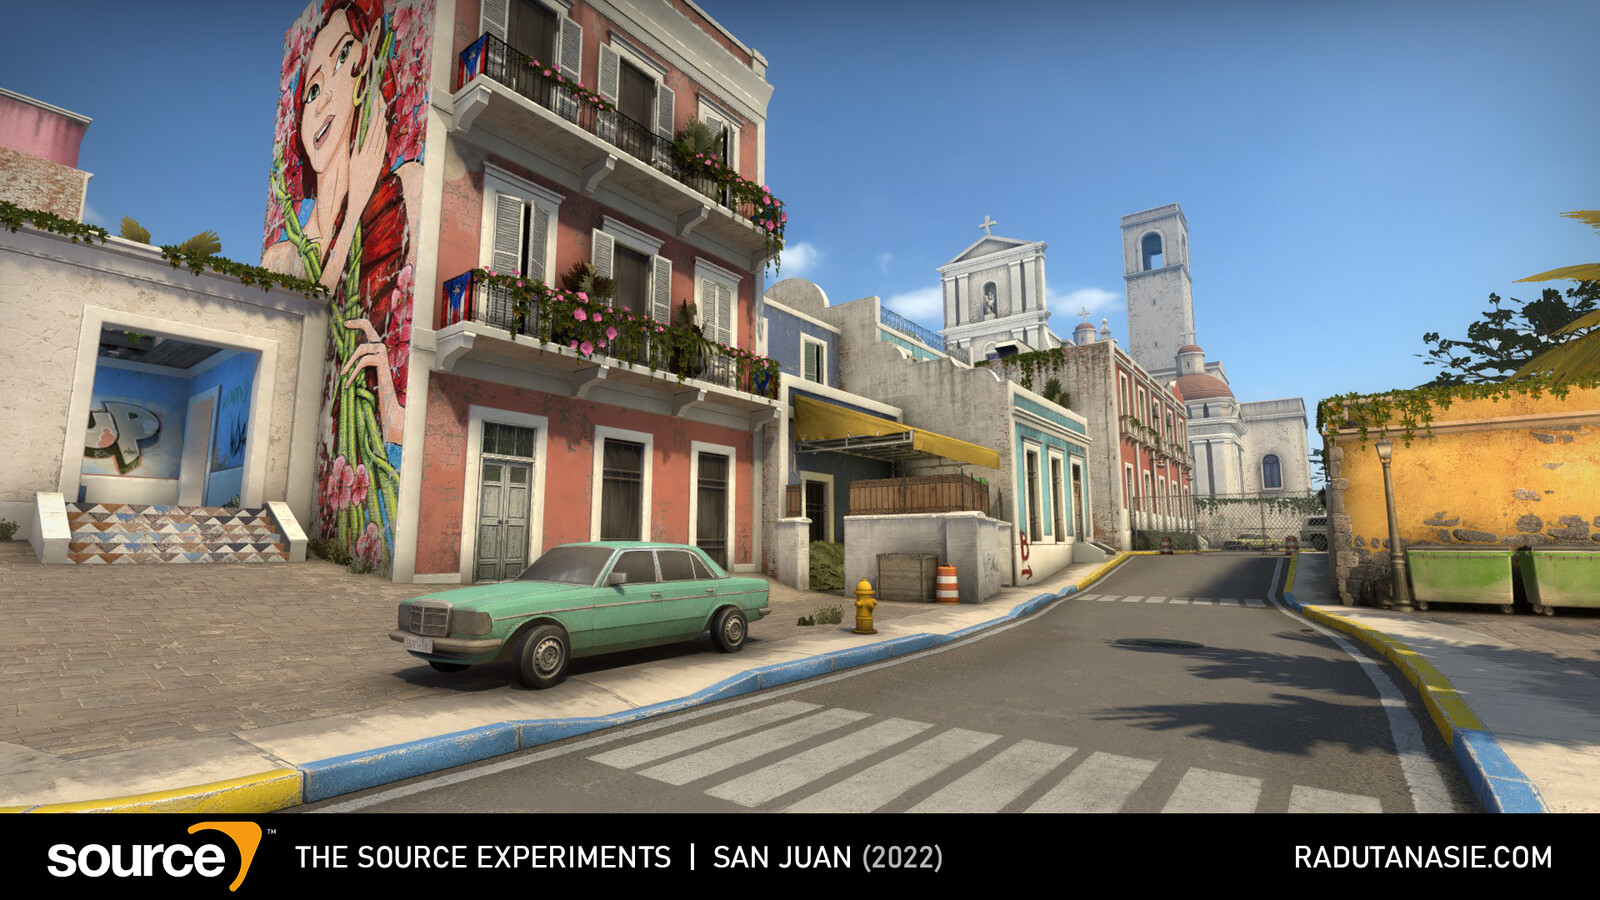 San Juan is a classic bomb/defuse map for Counter-Strike: Global Offensive, featuring an old spanish fort and vibrant city streets. The map released to overwhelming positive reception on the Steam Workshop, reaching 32k subscribers in the first 3 months.